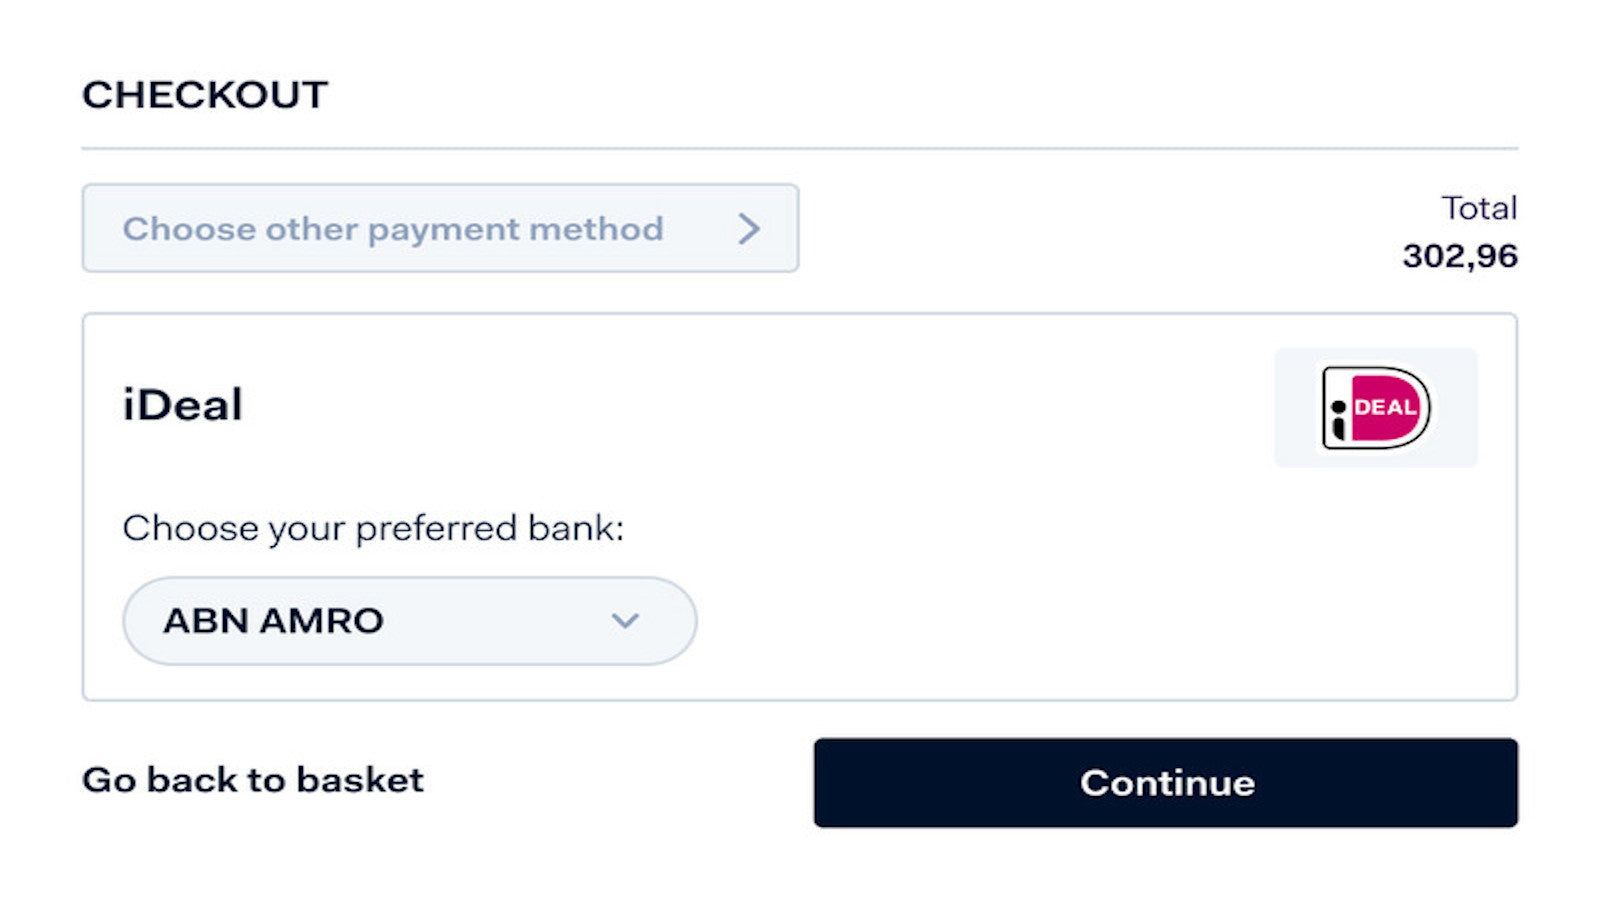 Using iDEAL as payment method